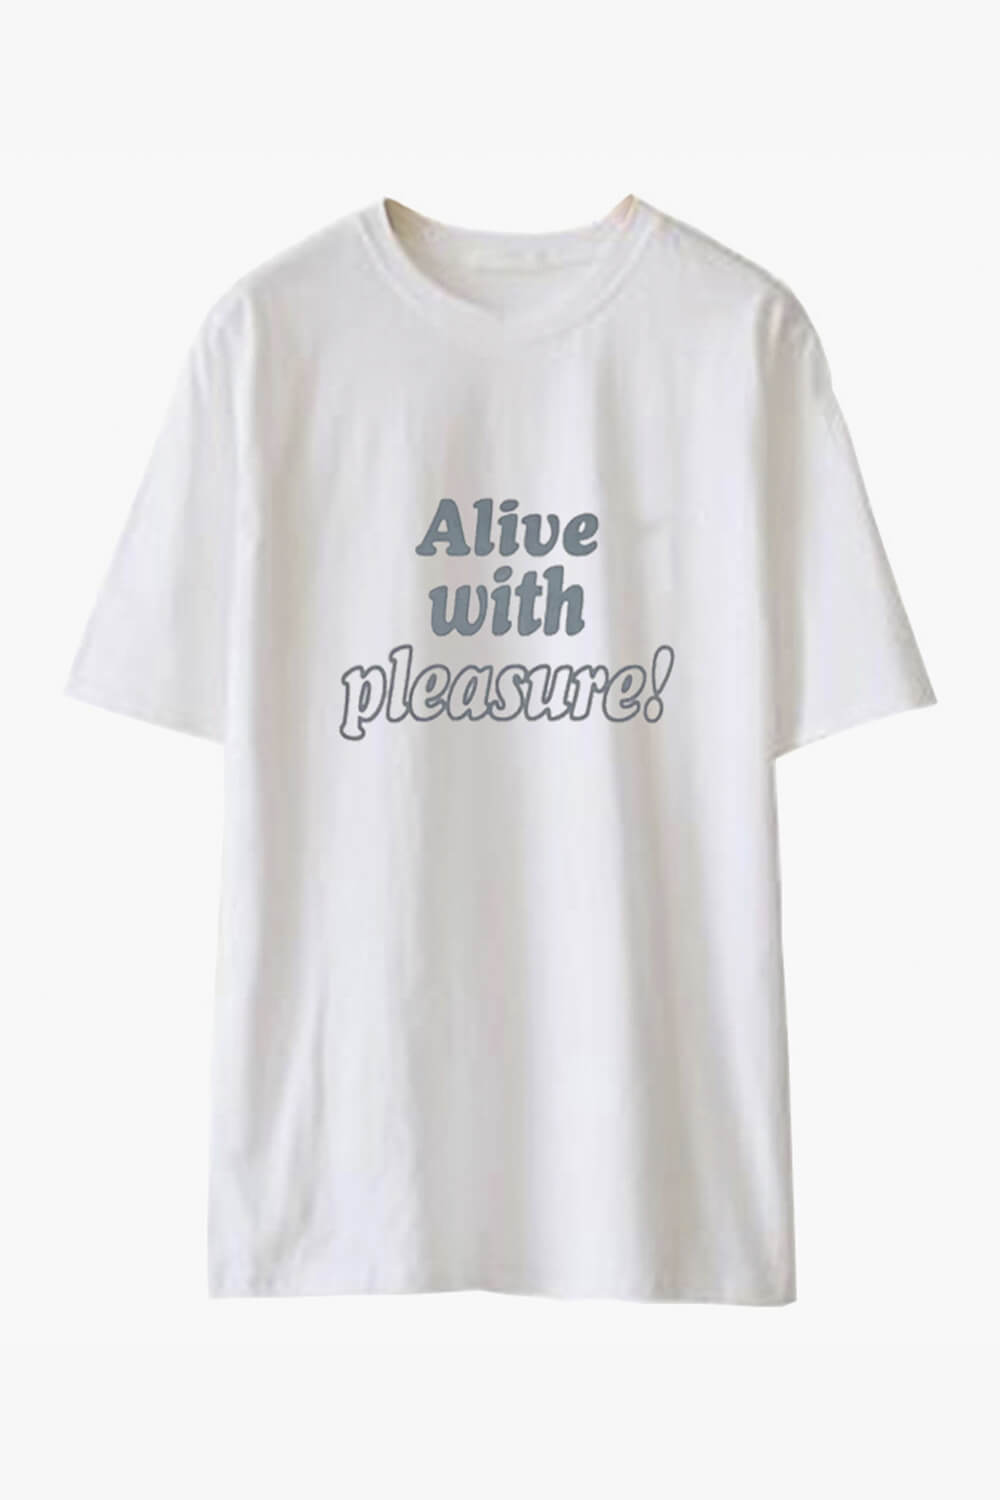 Pleasure Spent Time Together Cyber Y2K T-Shirt - Aesthetic